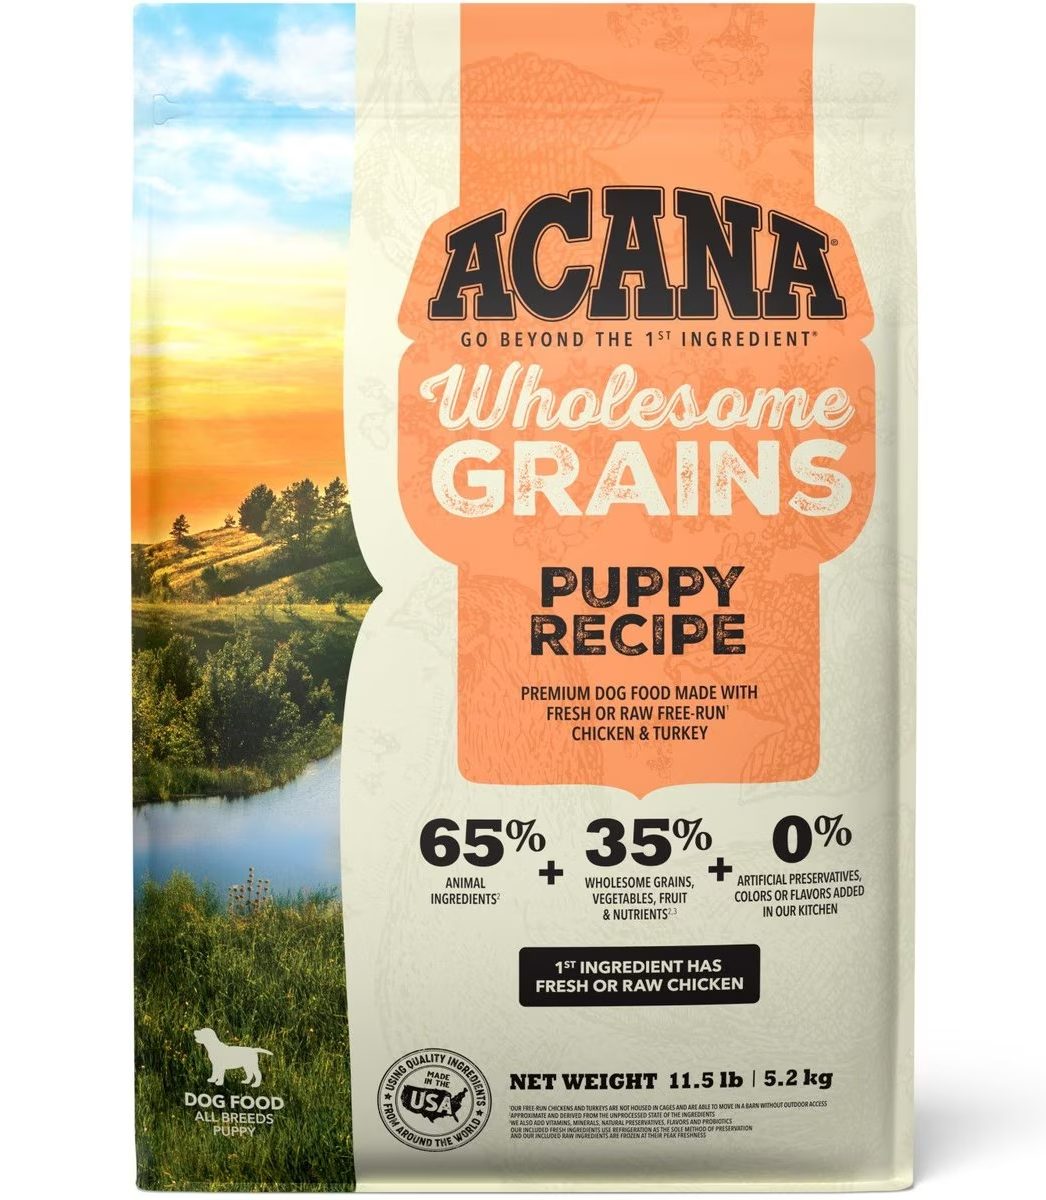 ACANA Wholesome Grains Puppy Recipe Dry Dog Food